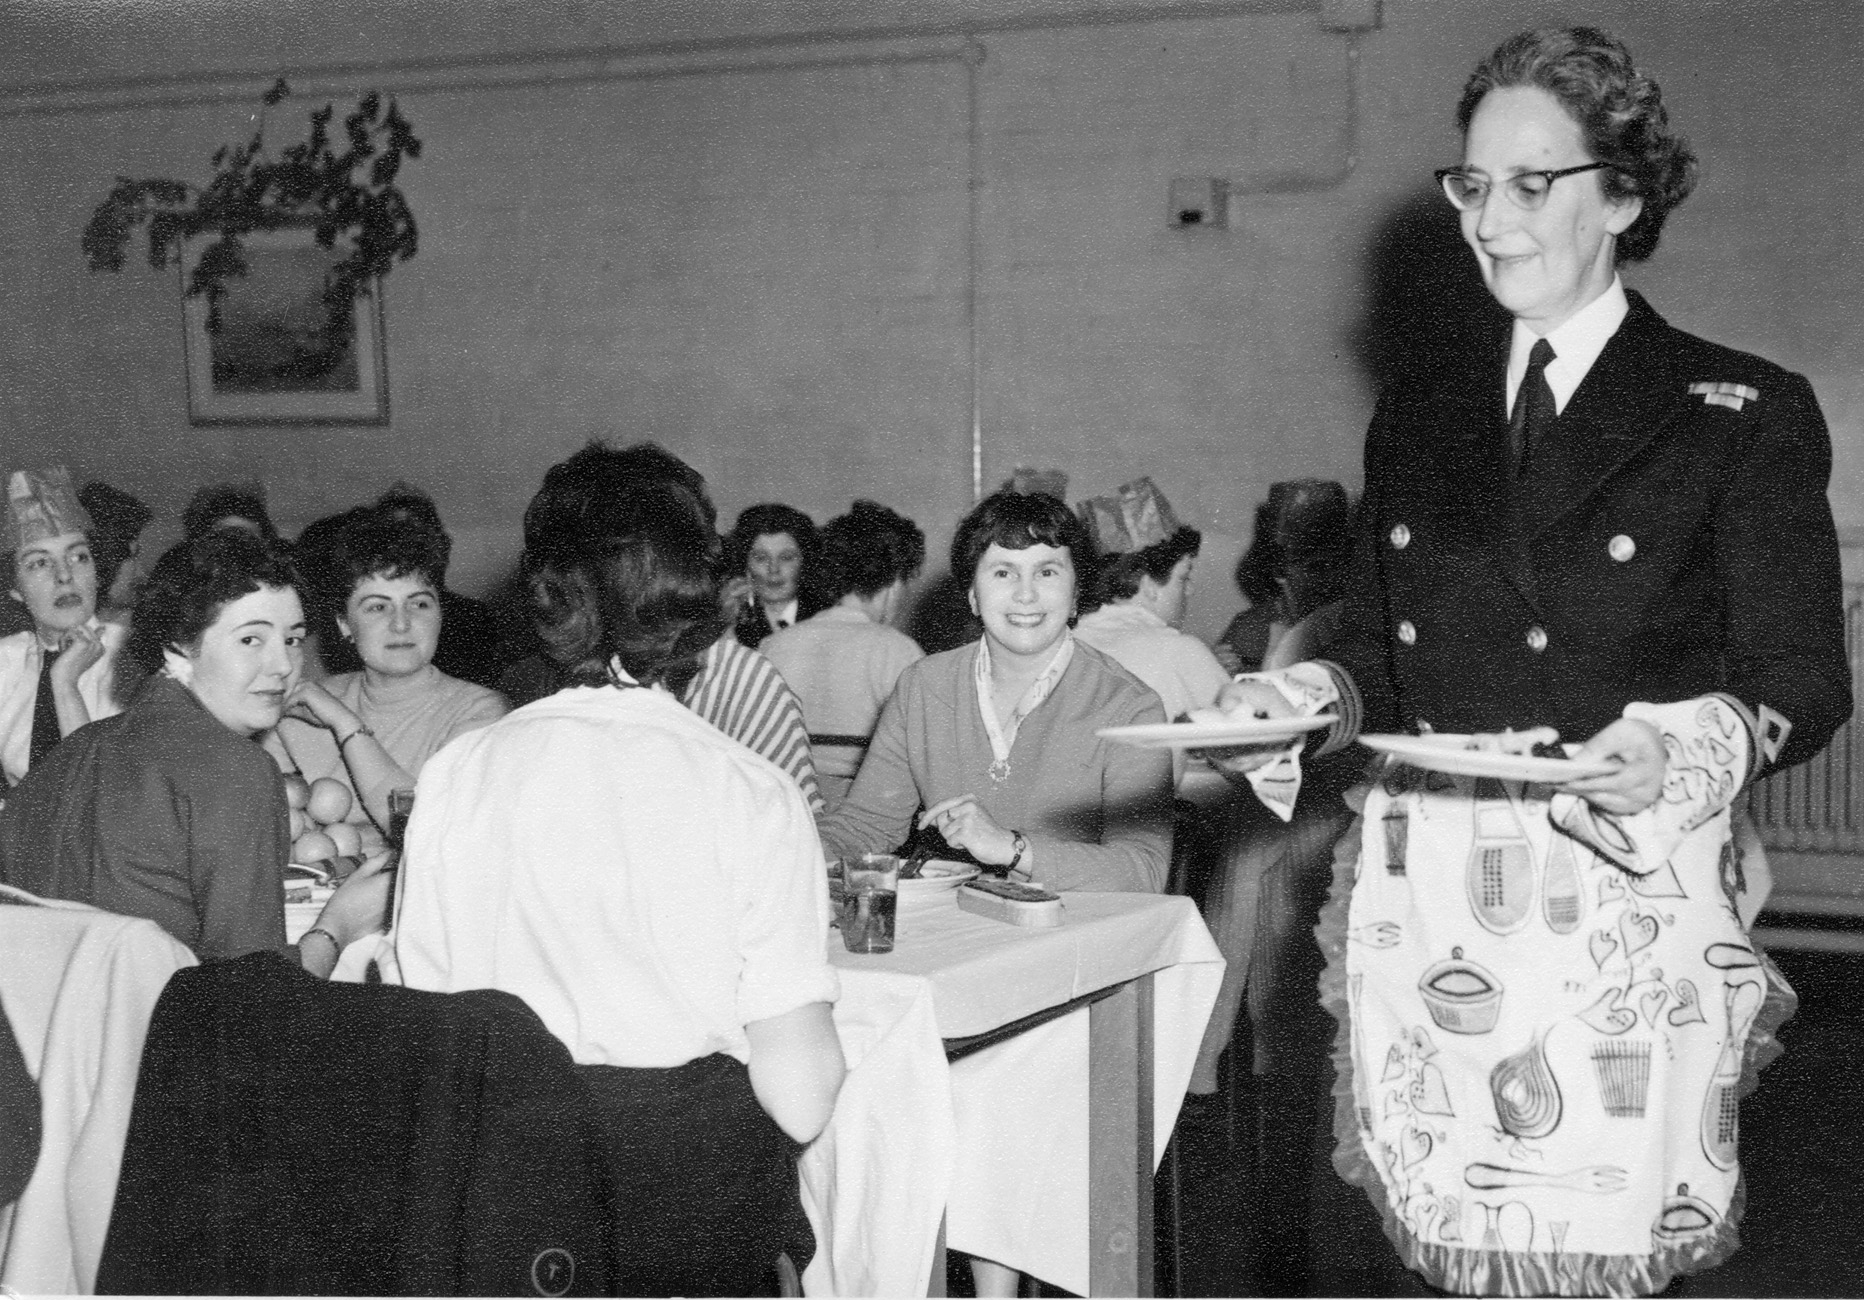 A Superintendent in the Women’s Royal Naval Service serving Christmas Dinner at HMS Dauntless in 1955